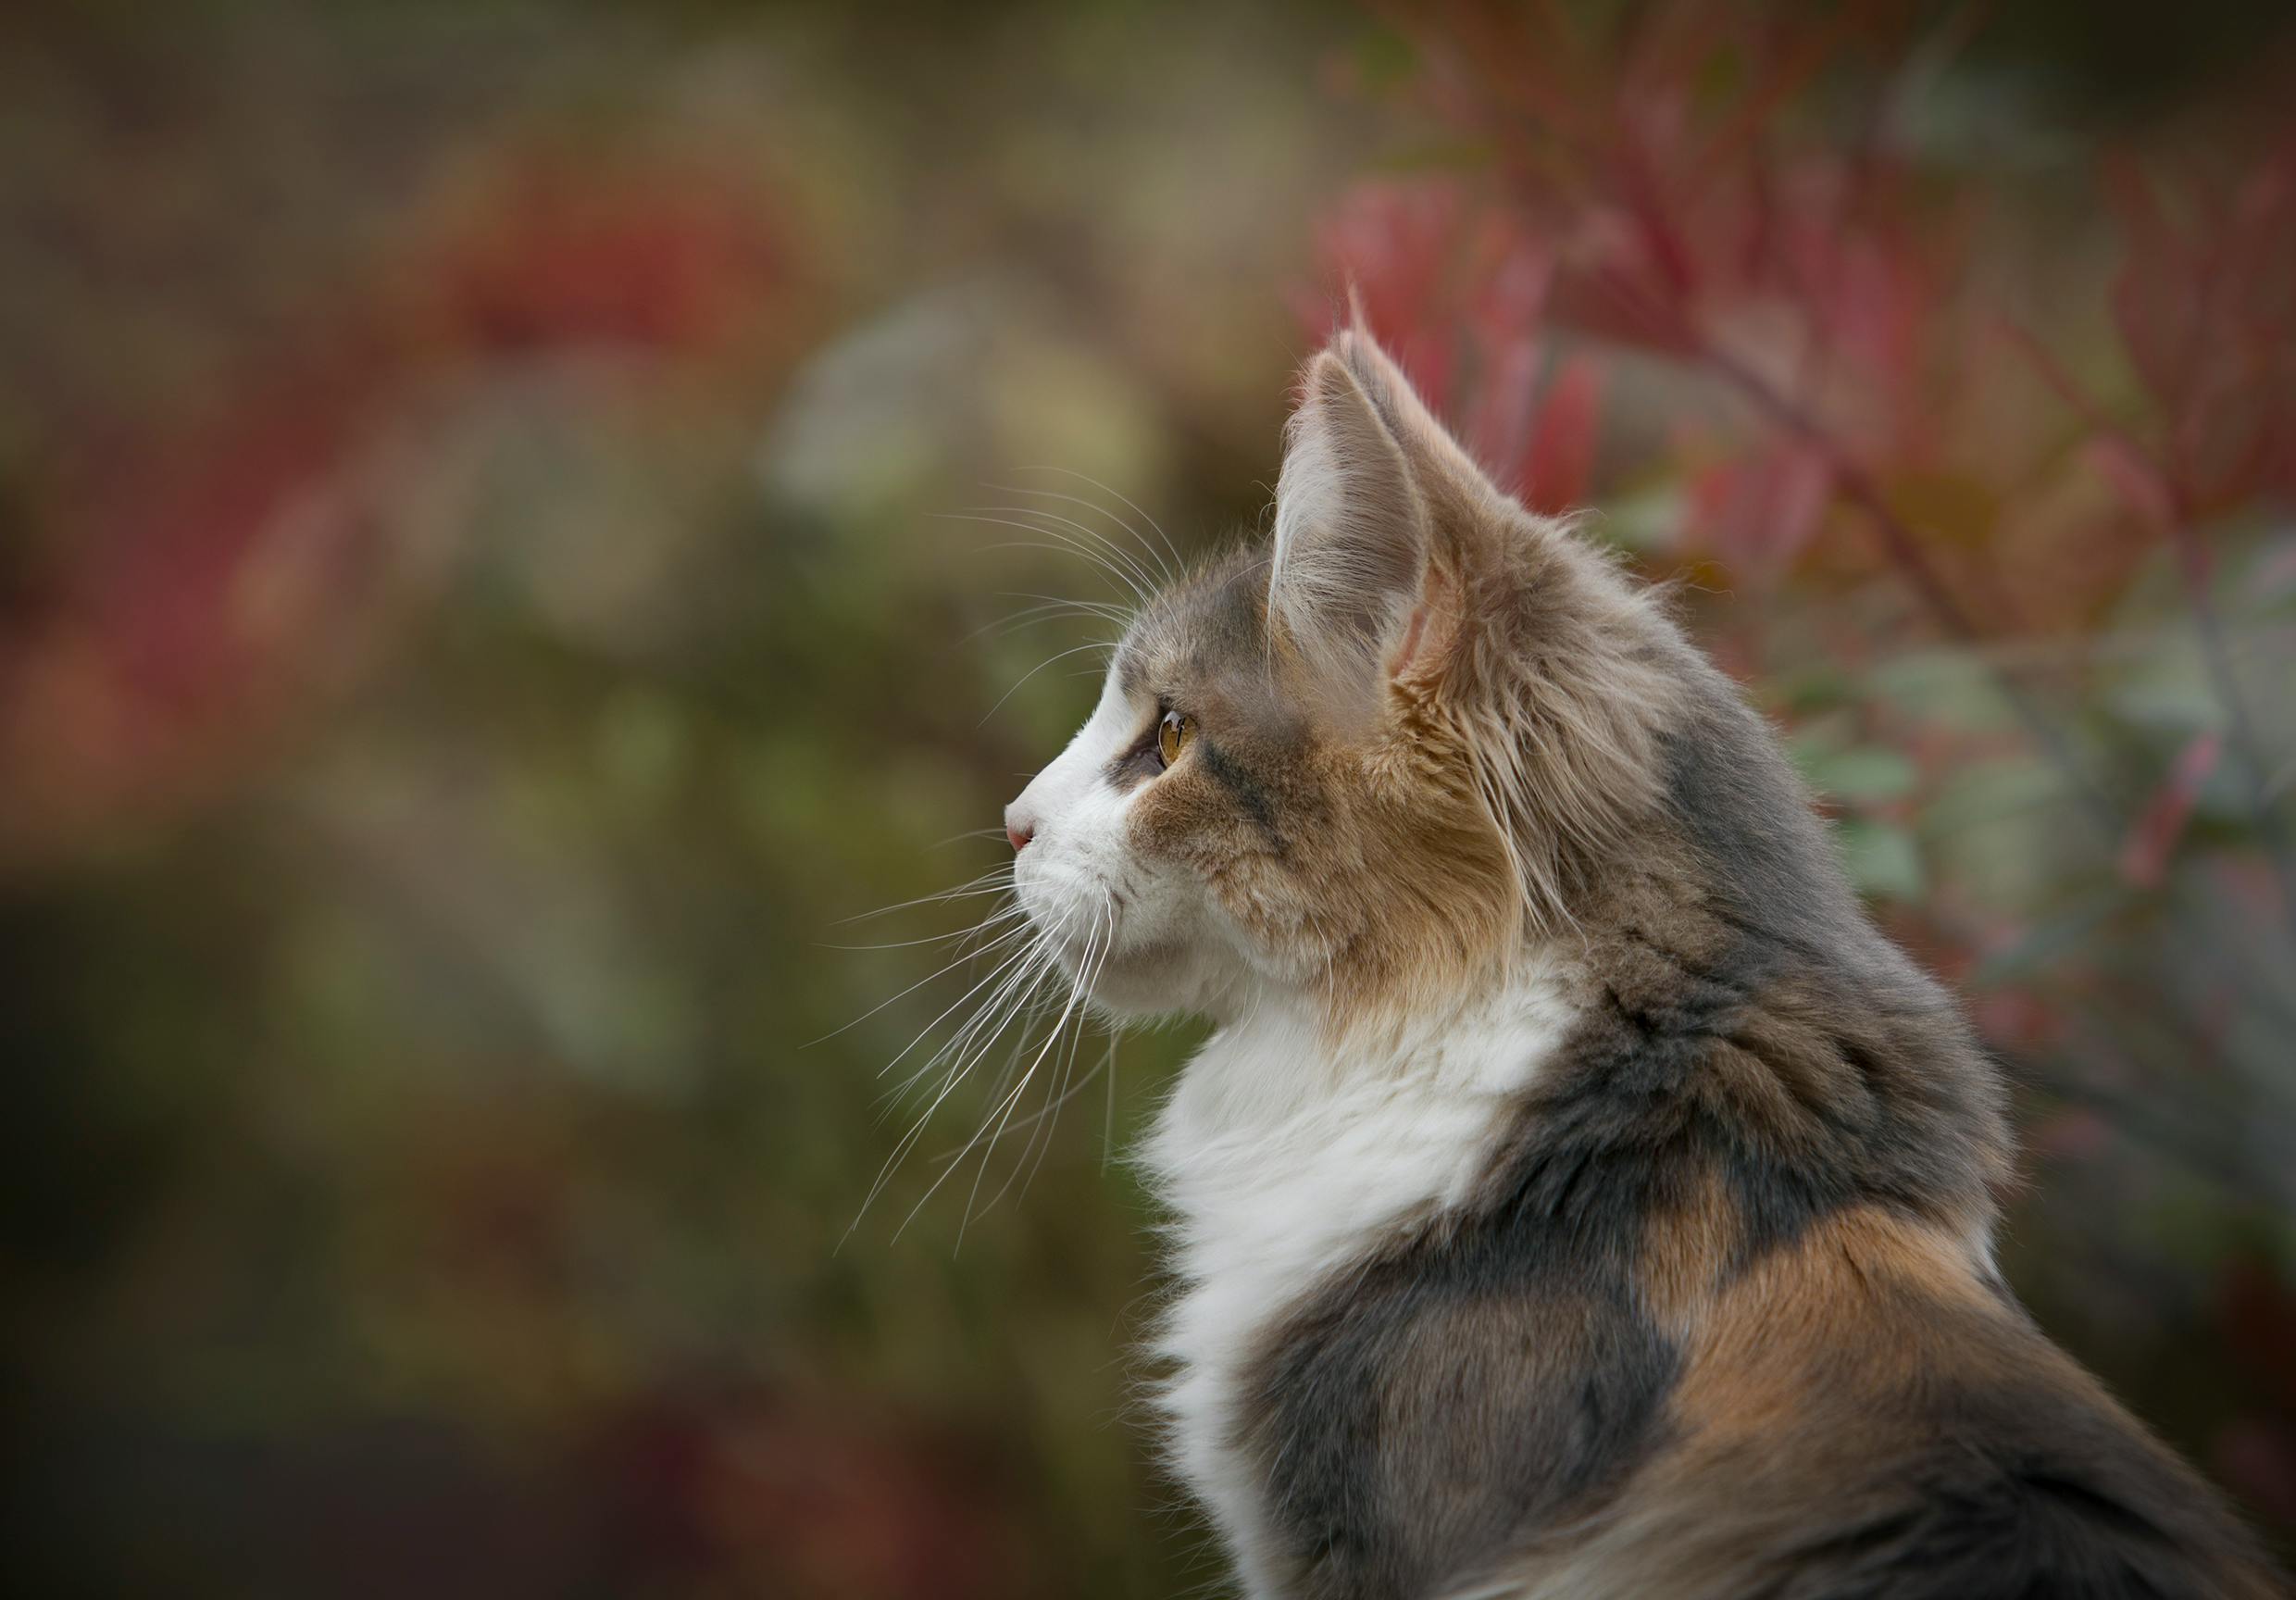 Do Cats Mourn Deaths Of Other Cats?